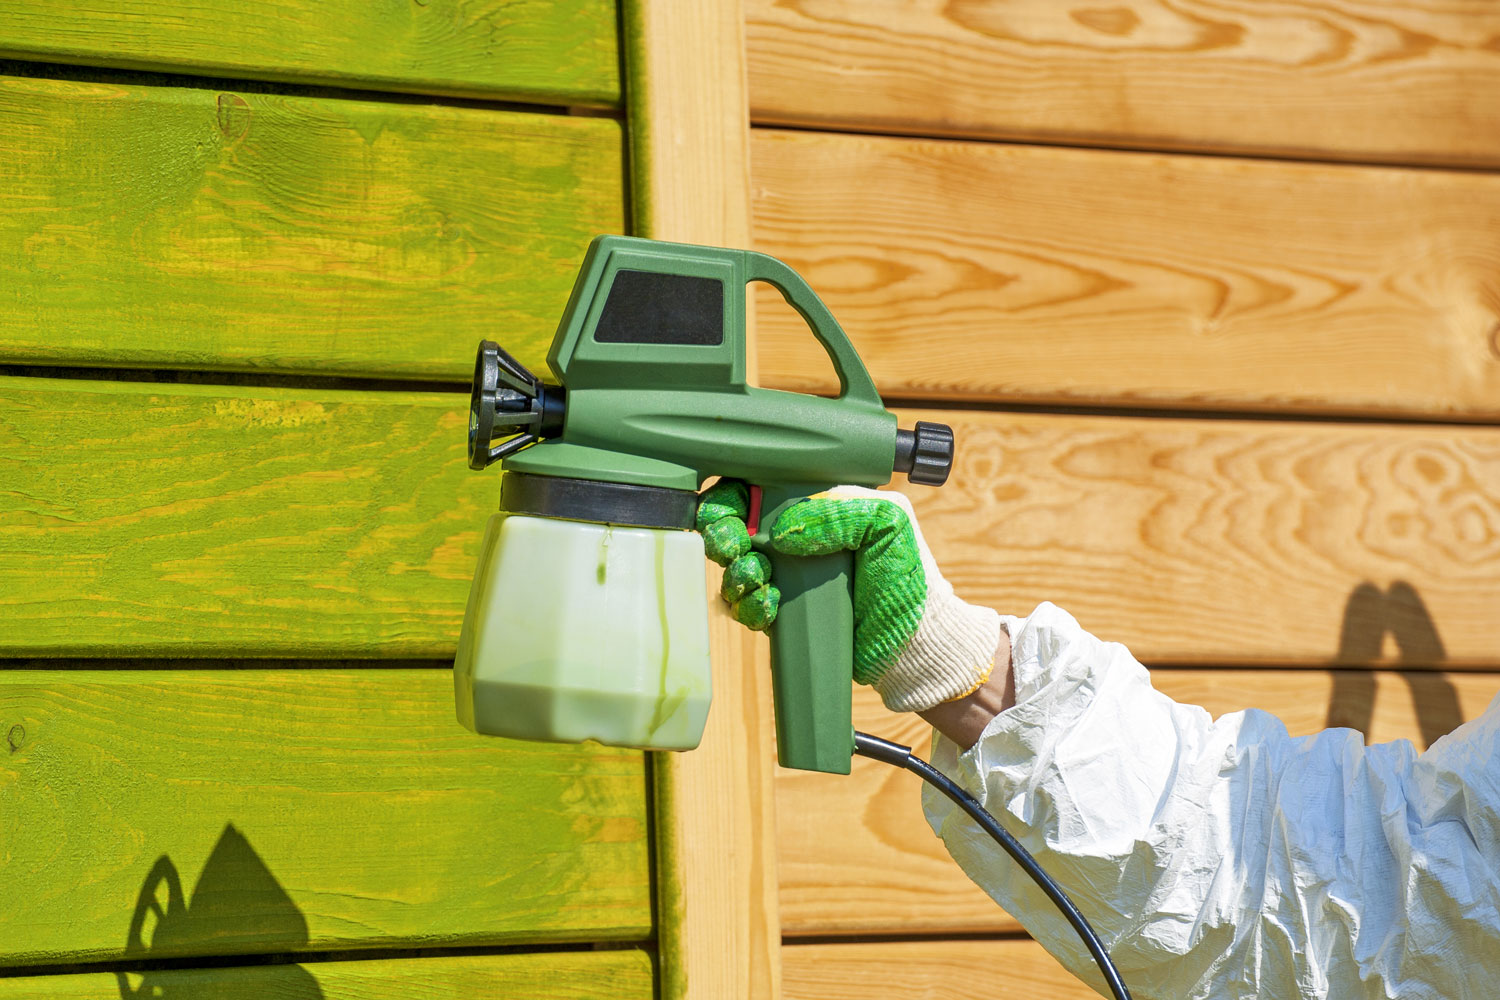 Properly equipped personnel painting the wall green using spray paint